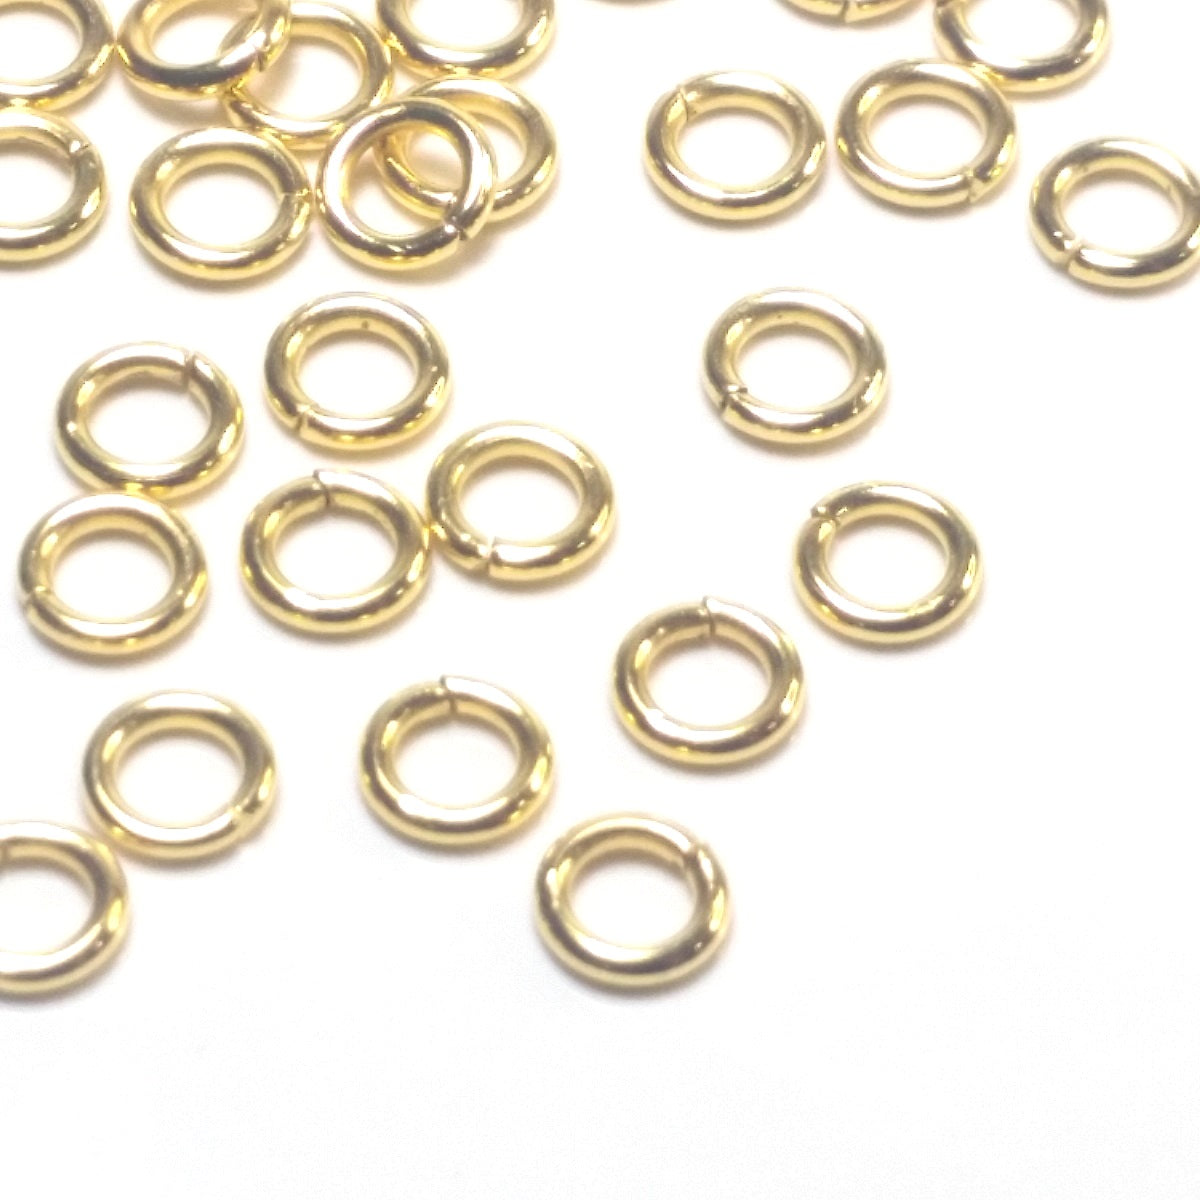 4mm x 22ga, Closed-Soldered Jump Ring, Gold Filled (50 Piece